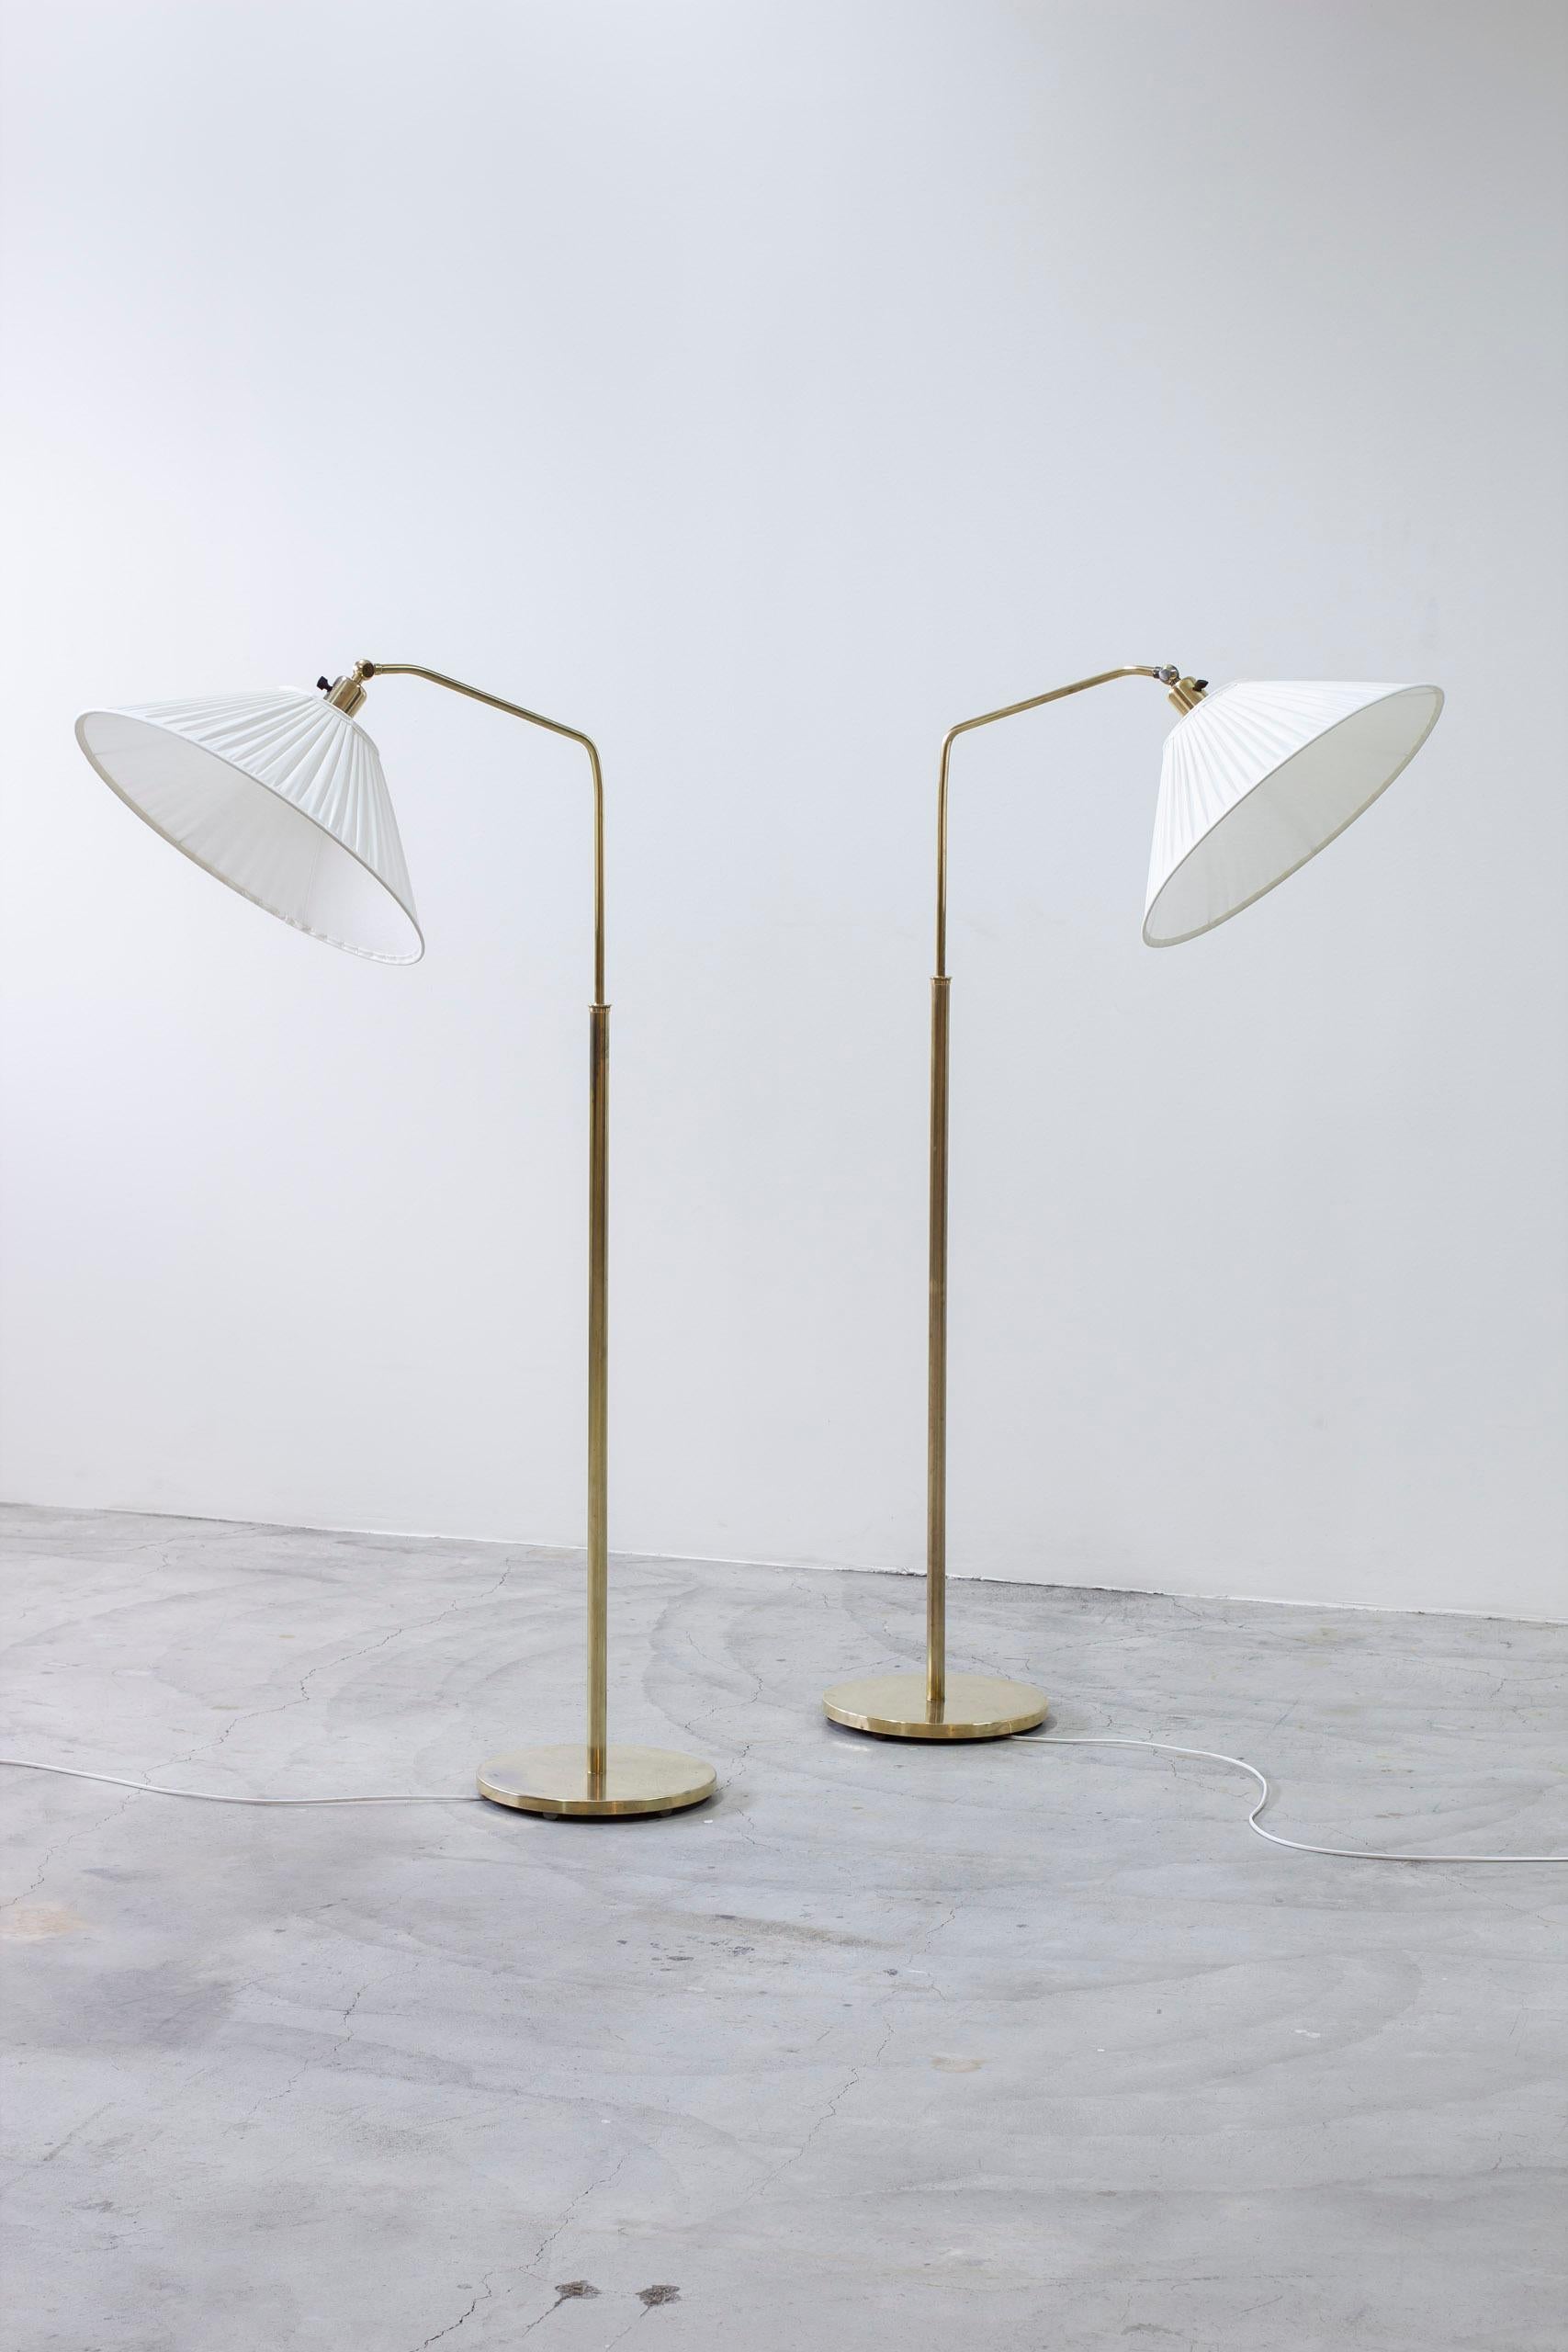 Pair of floor lamps model 15028 designed by Harald Elof Notini. Produced in Sweden by Arvid Böhlmarks Lampfabrik during the 1940s. Made from brass with newly produced lamp shades with off white chintz fabric, sewn with single hand pleating. Bakelite